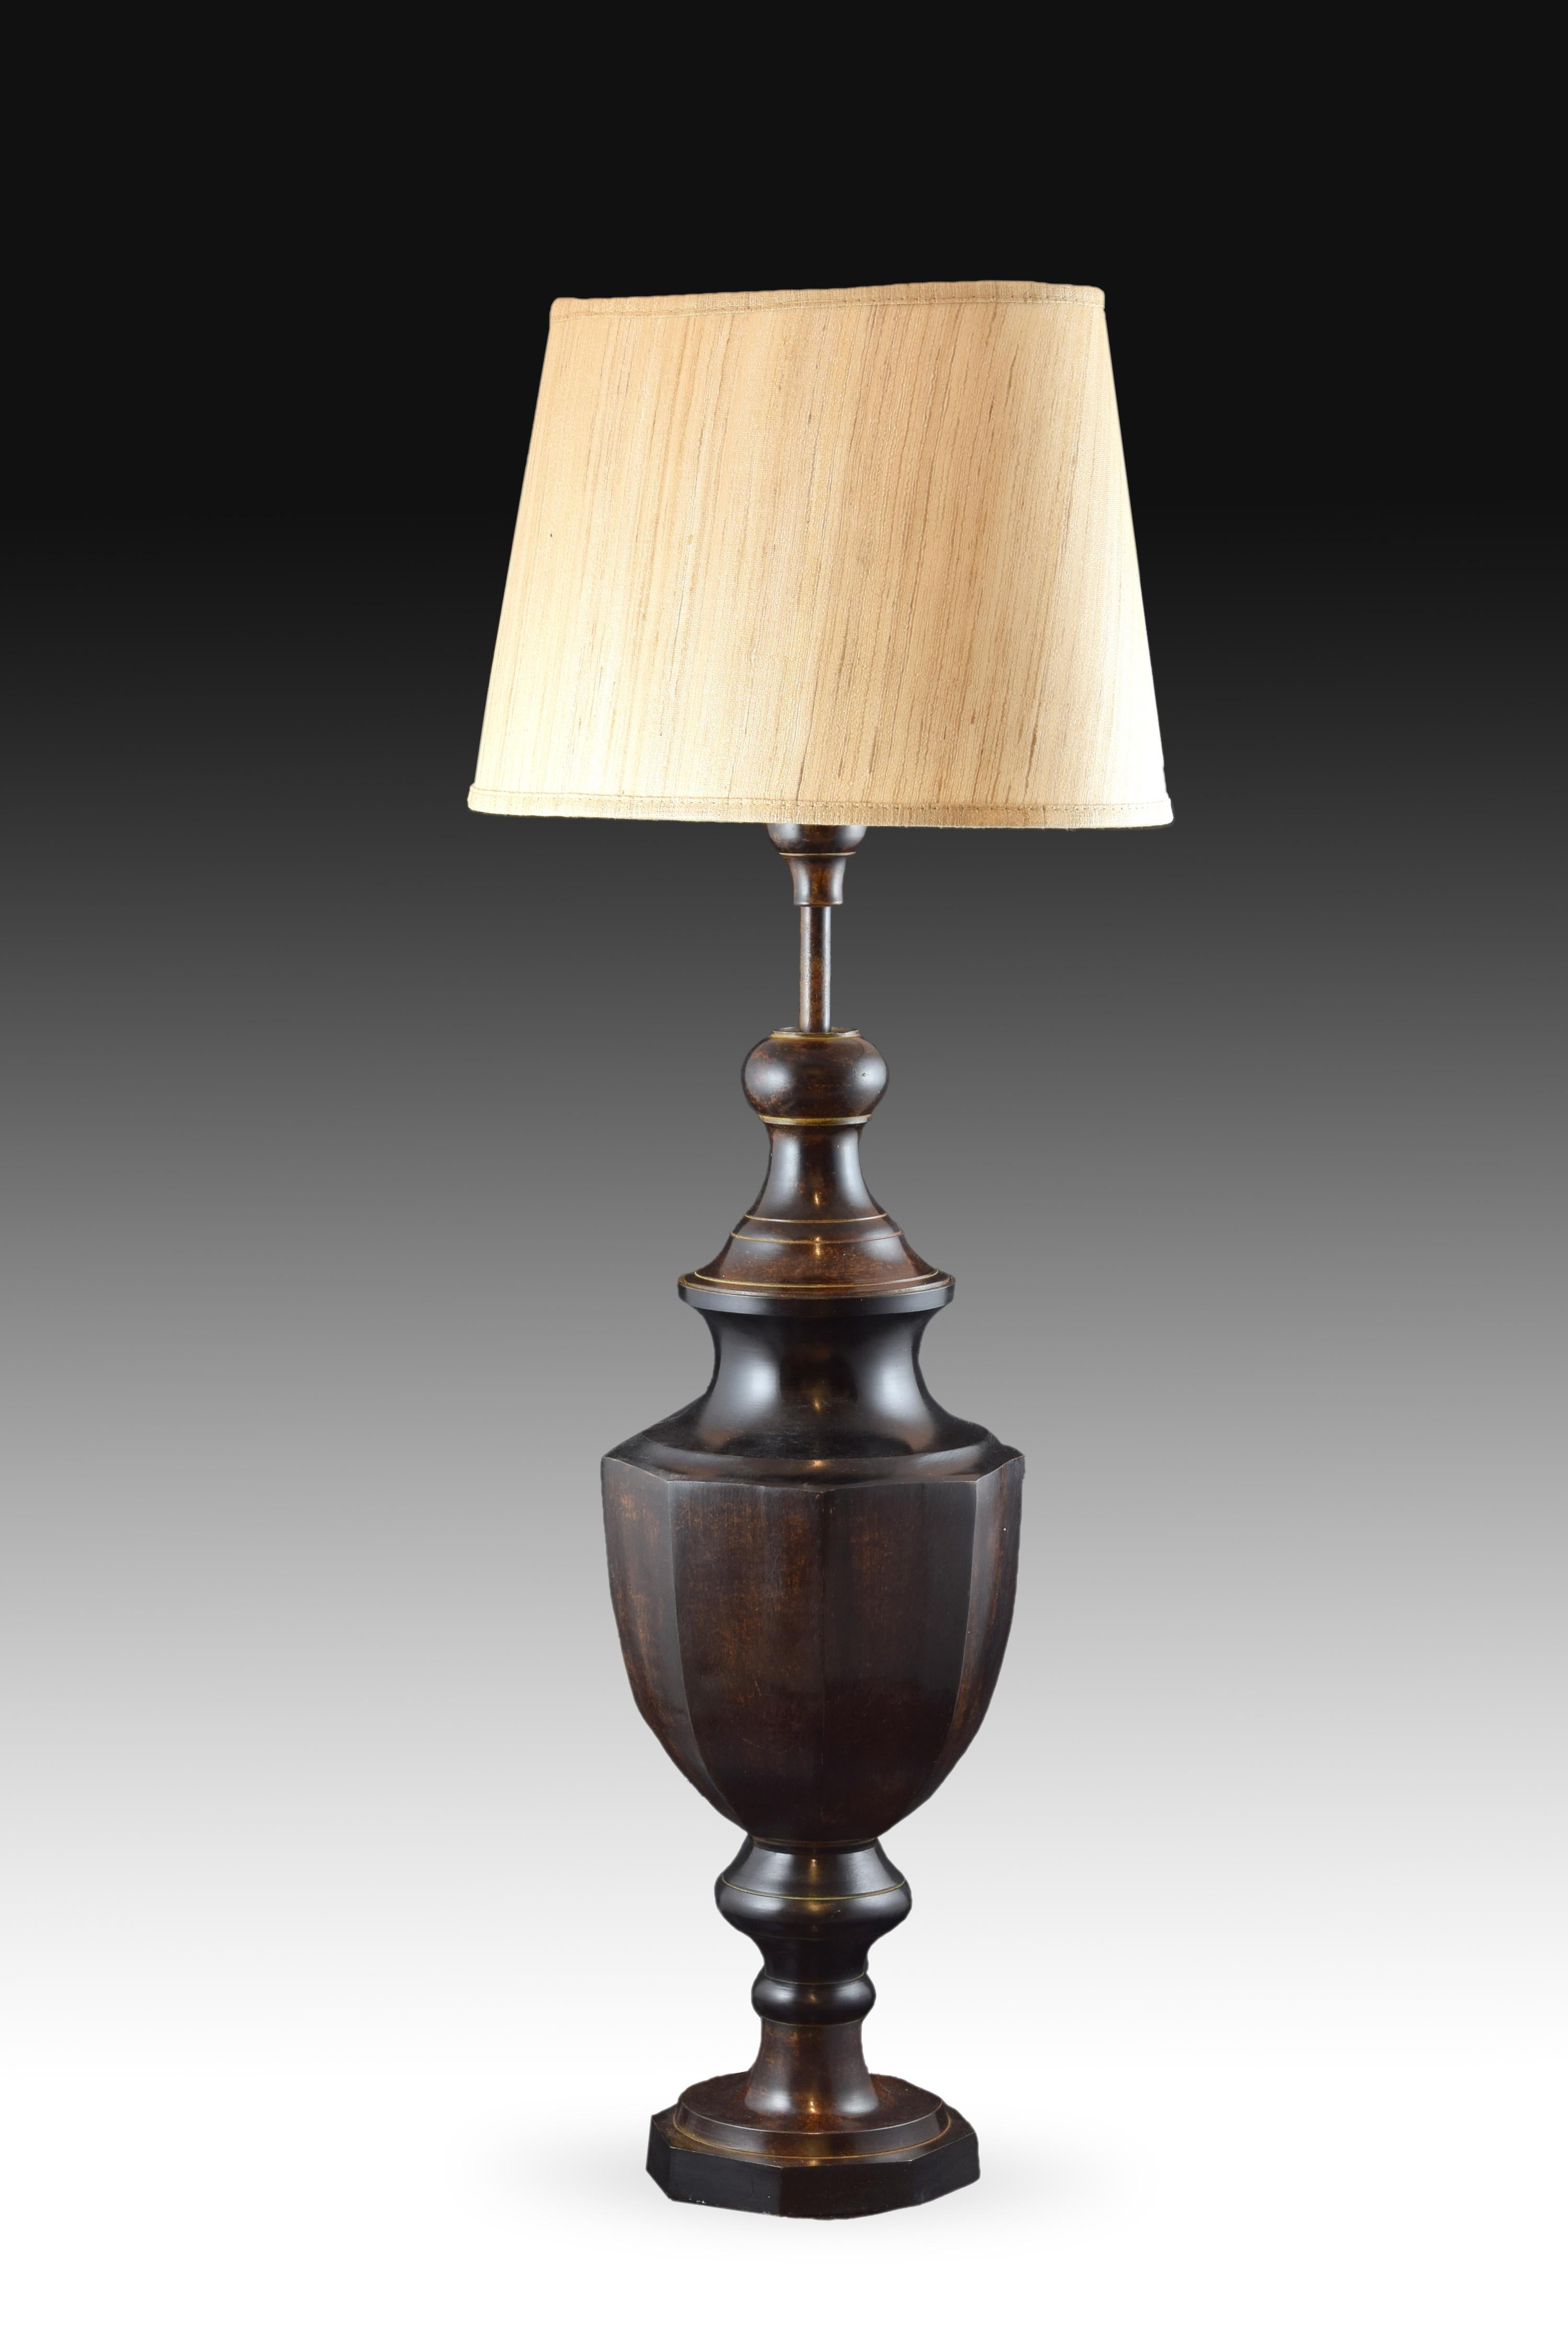 Empire style bronze lamp in patinated bronze. Without screen.
On a polygonal base stands the foot of the lamp, which has been given a vase shape with a polygonal body inspired by classicism, as befits the style called Empire that has been taken to